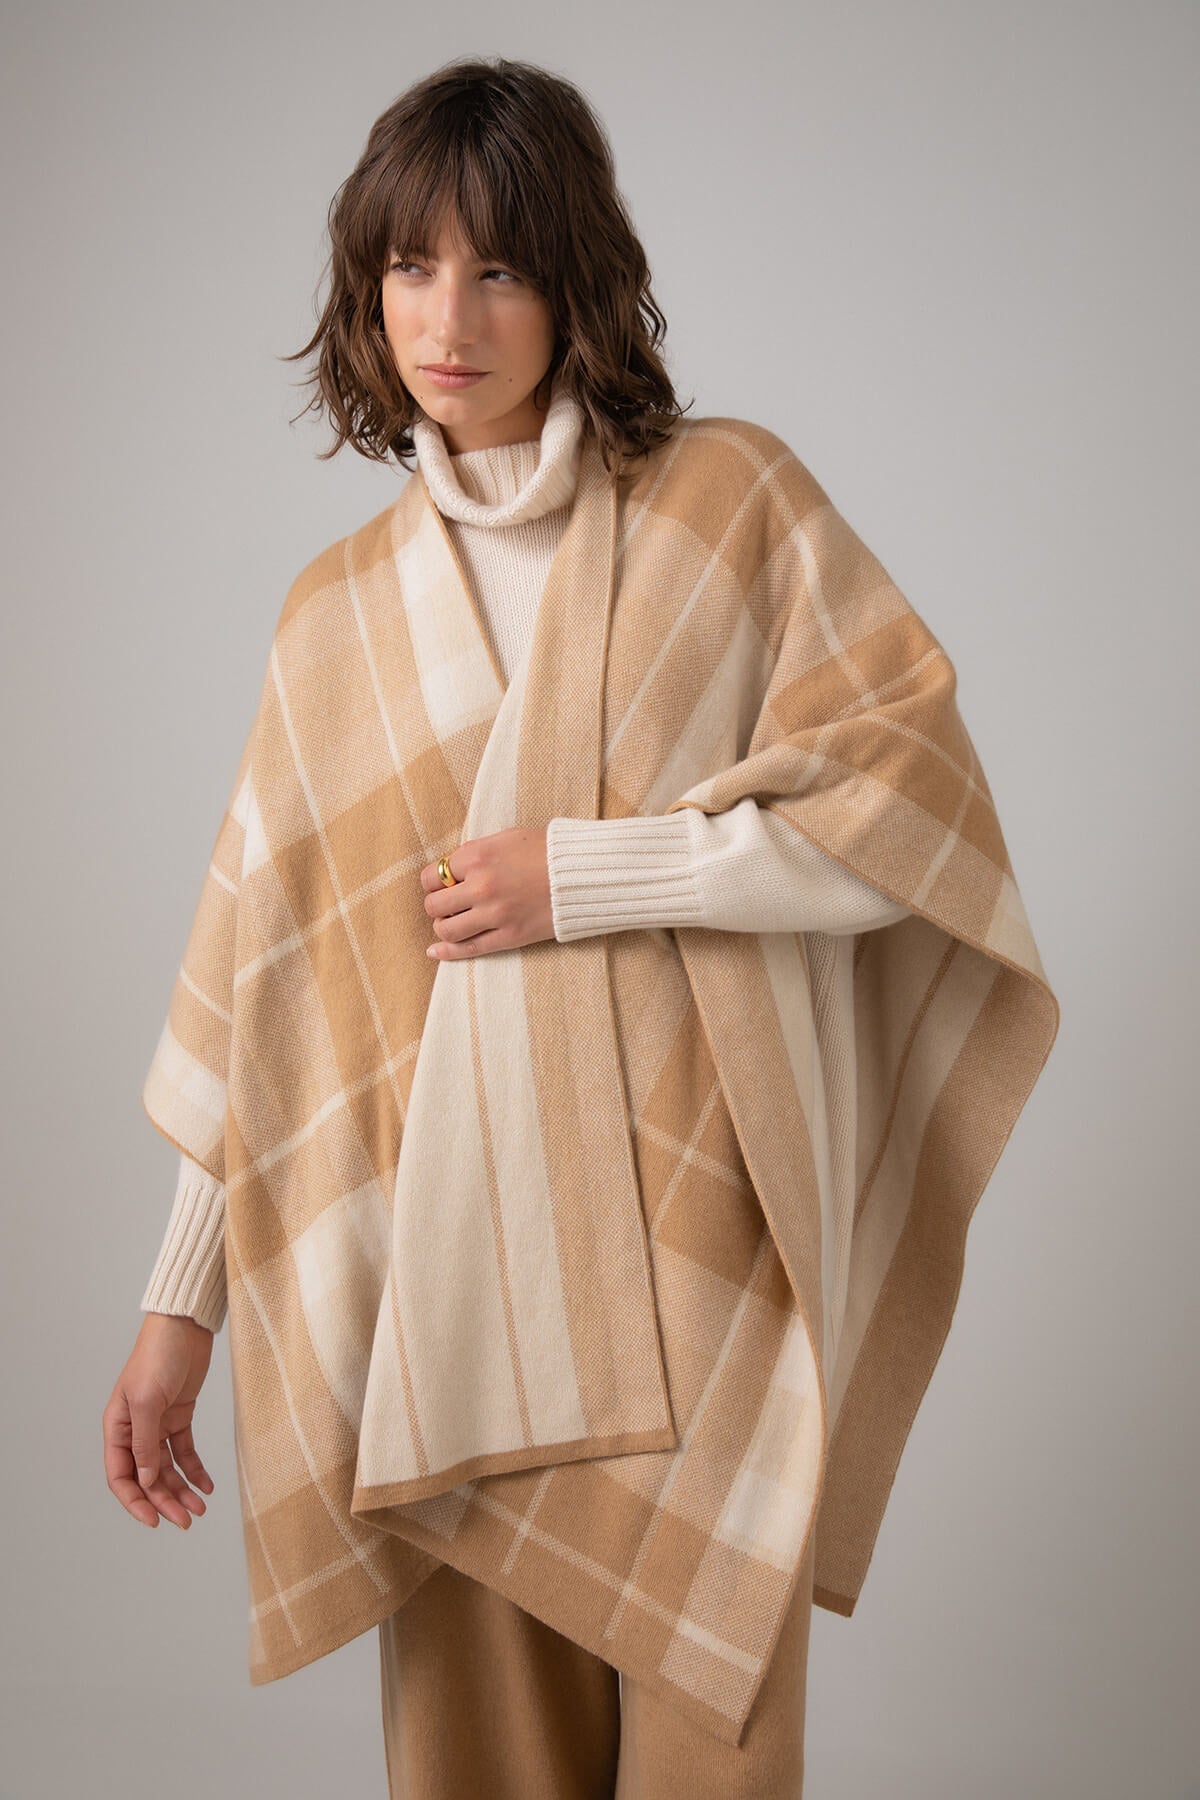 Details of a Johnstons of Elgin Double Face Cashmere Check Cape in Camel Check worn with Cream Cashmere Roll Neck and Camel Culottes on a grey background KAP05104JU1548ONE